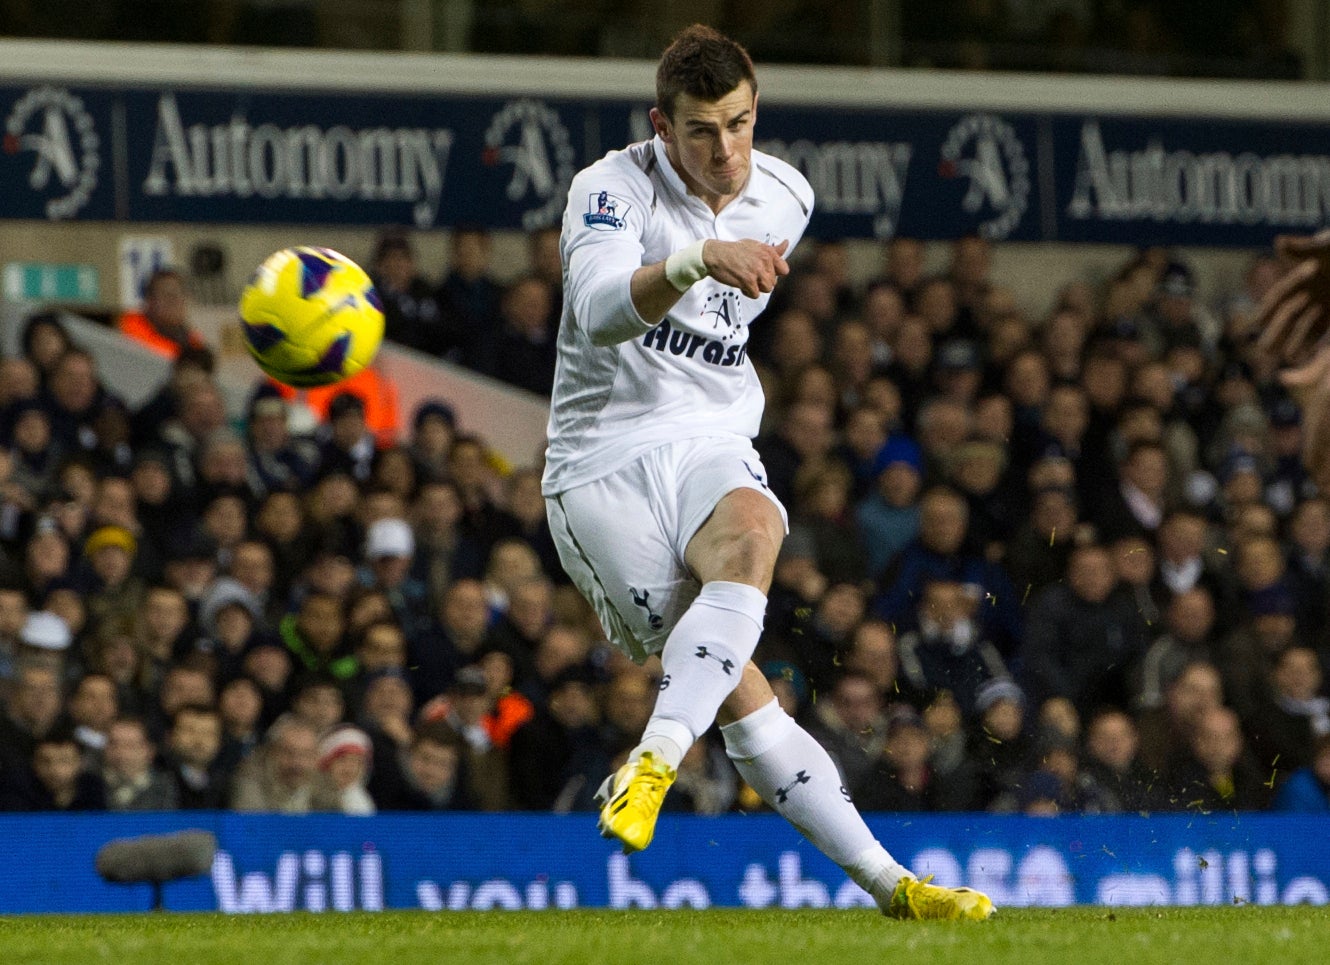 Gareth Bale Re-joins Tottenham on Loan from Real Madrid